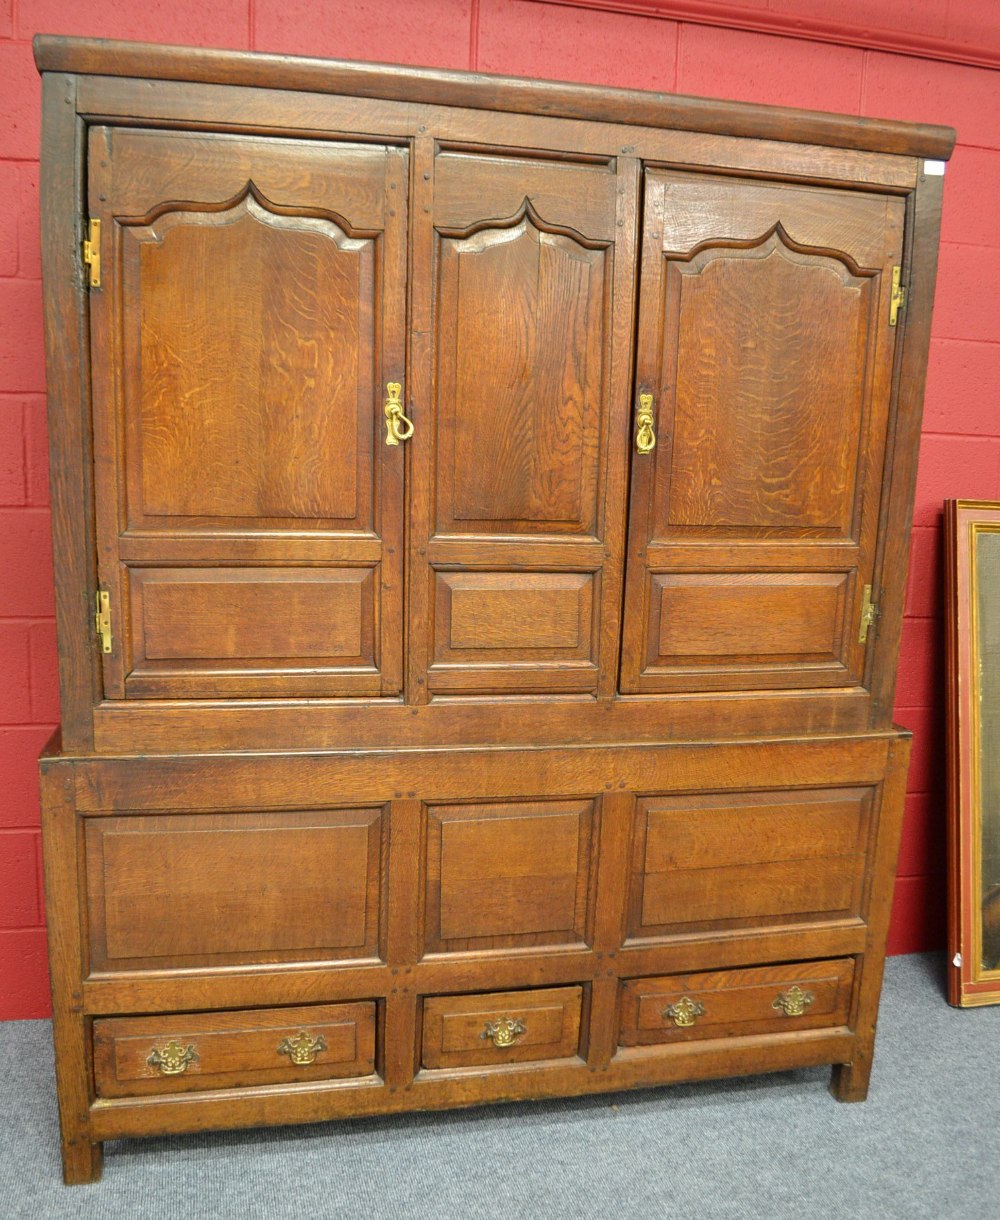 An 18th Century Joined Oak Livery Cupboard, with fielded panel doors enclosing later shelves, the